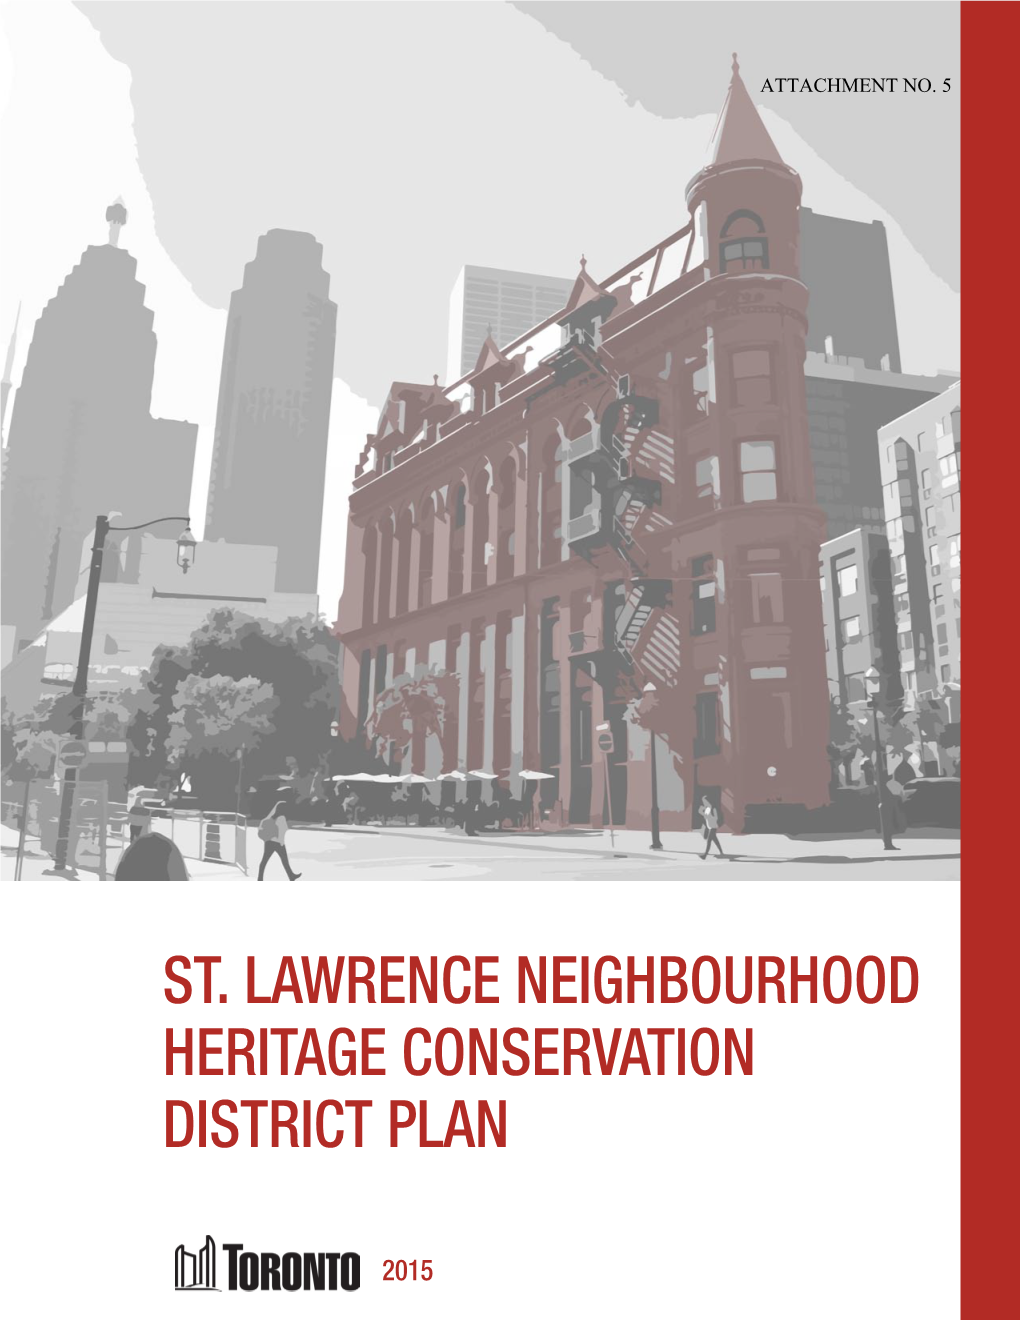 St. Lawrence Neighbourhood Heritage Conservation District Plan